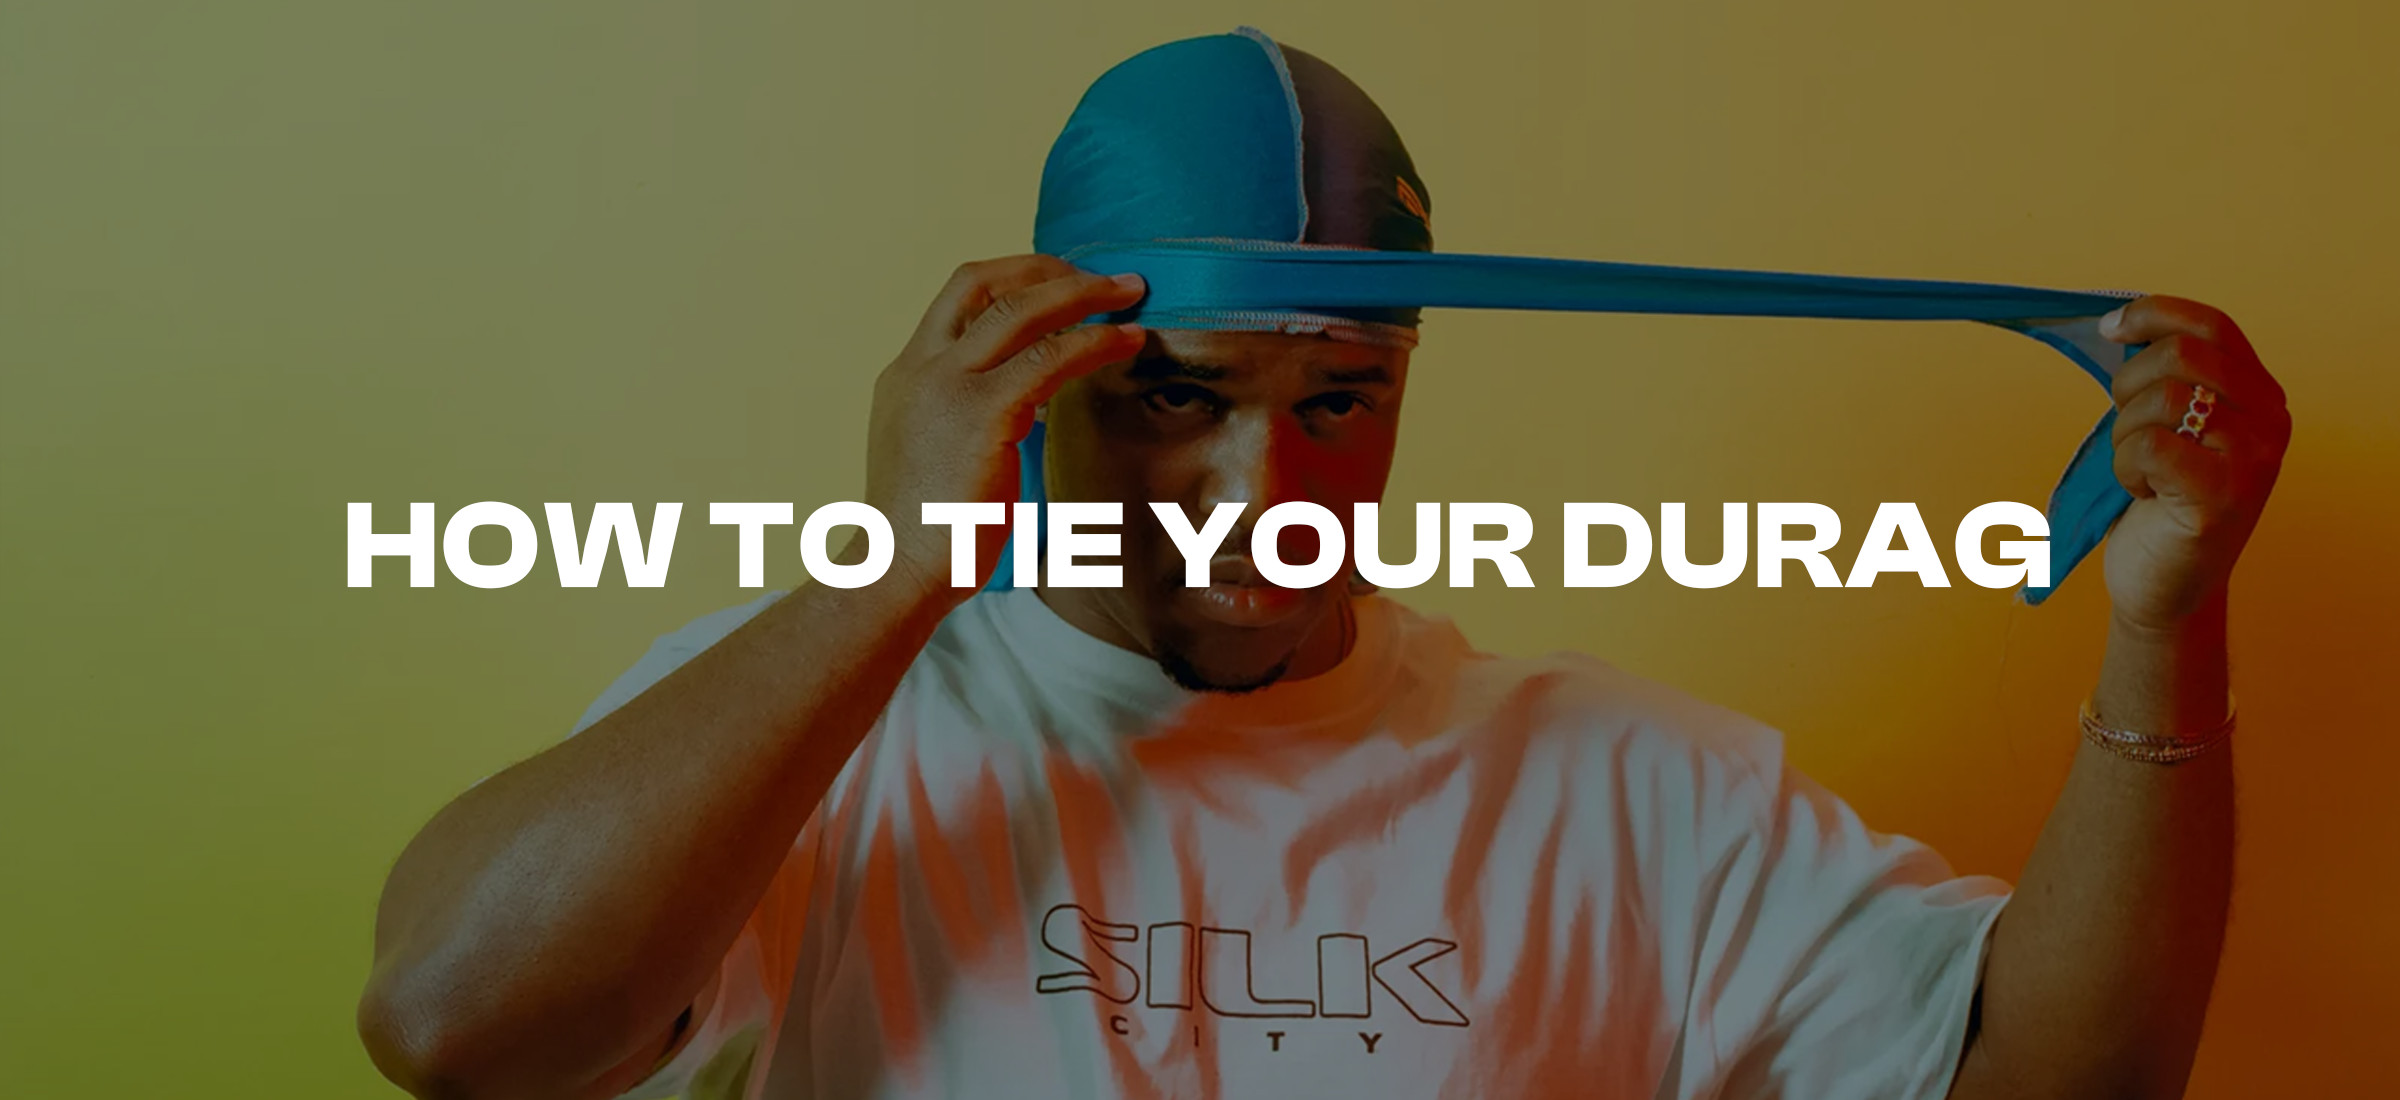 How to Tie a Durag: Step-by-Step Guide for Beginners